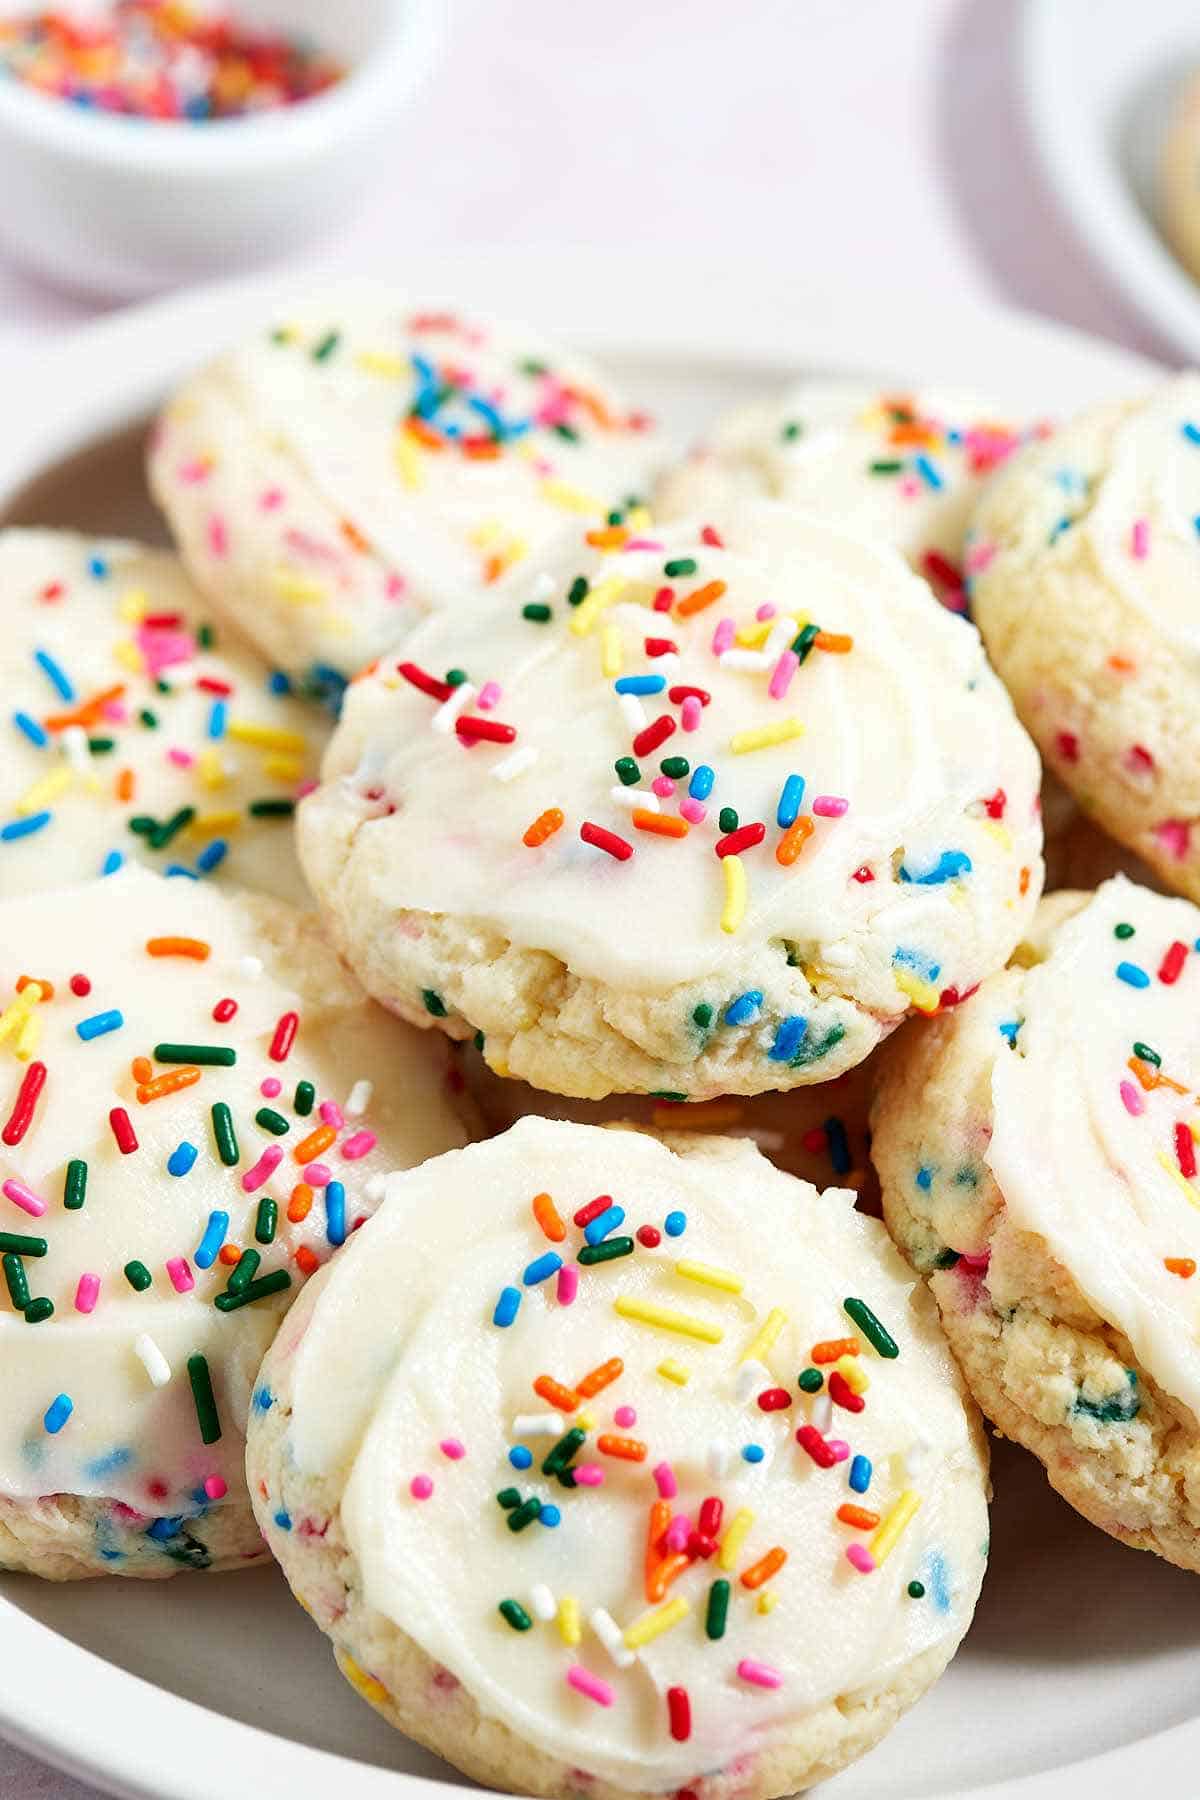 Plate full of Funfetti cake mix cookies frosted with sprinkles.